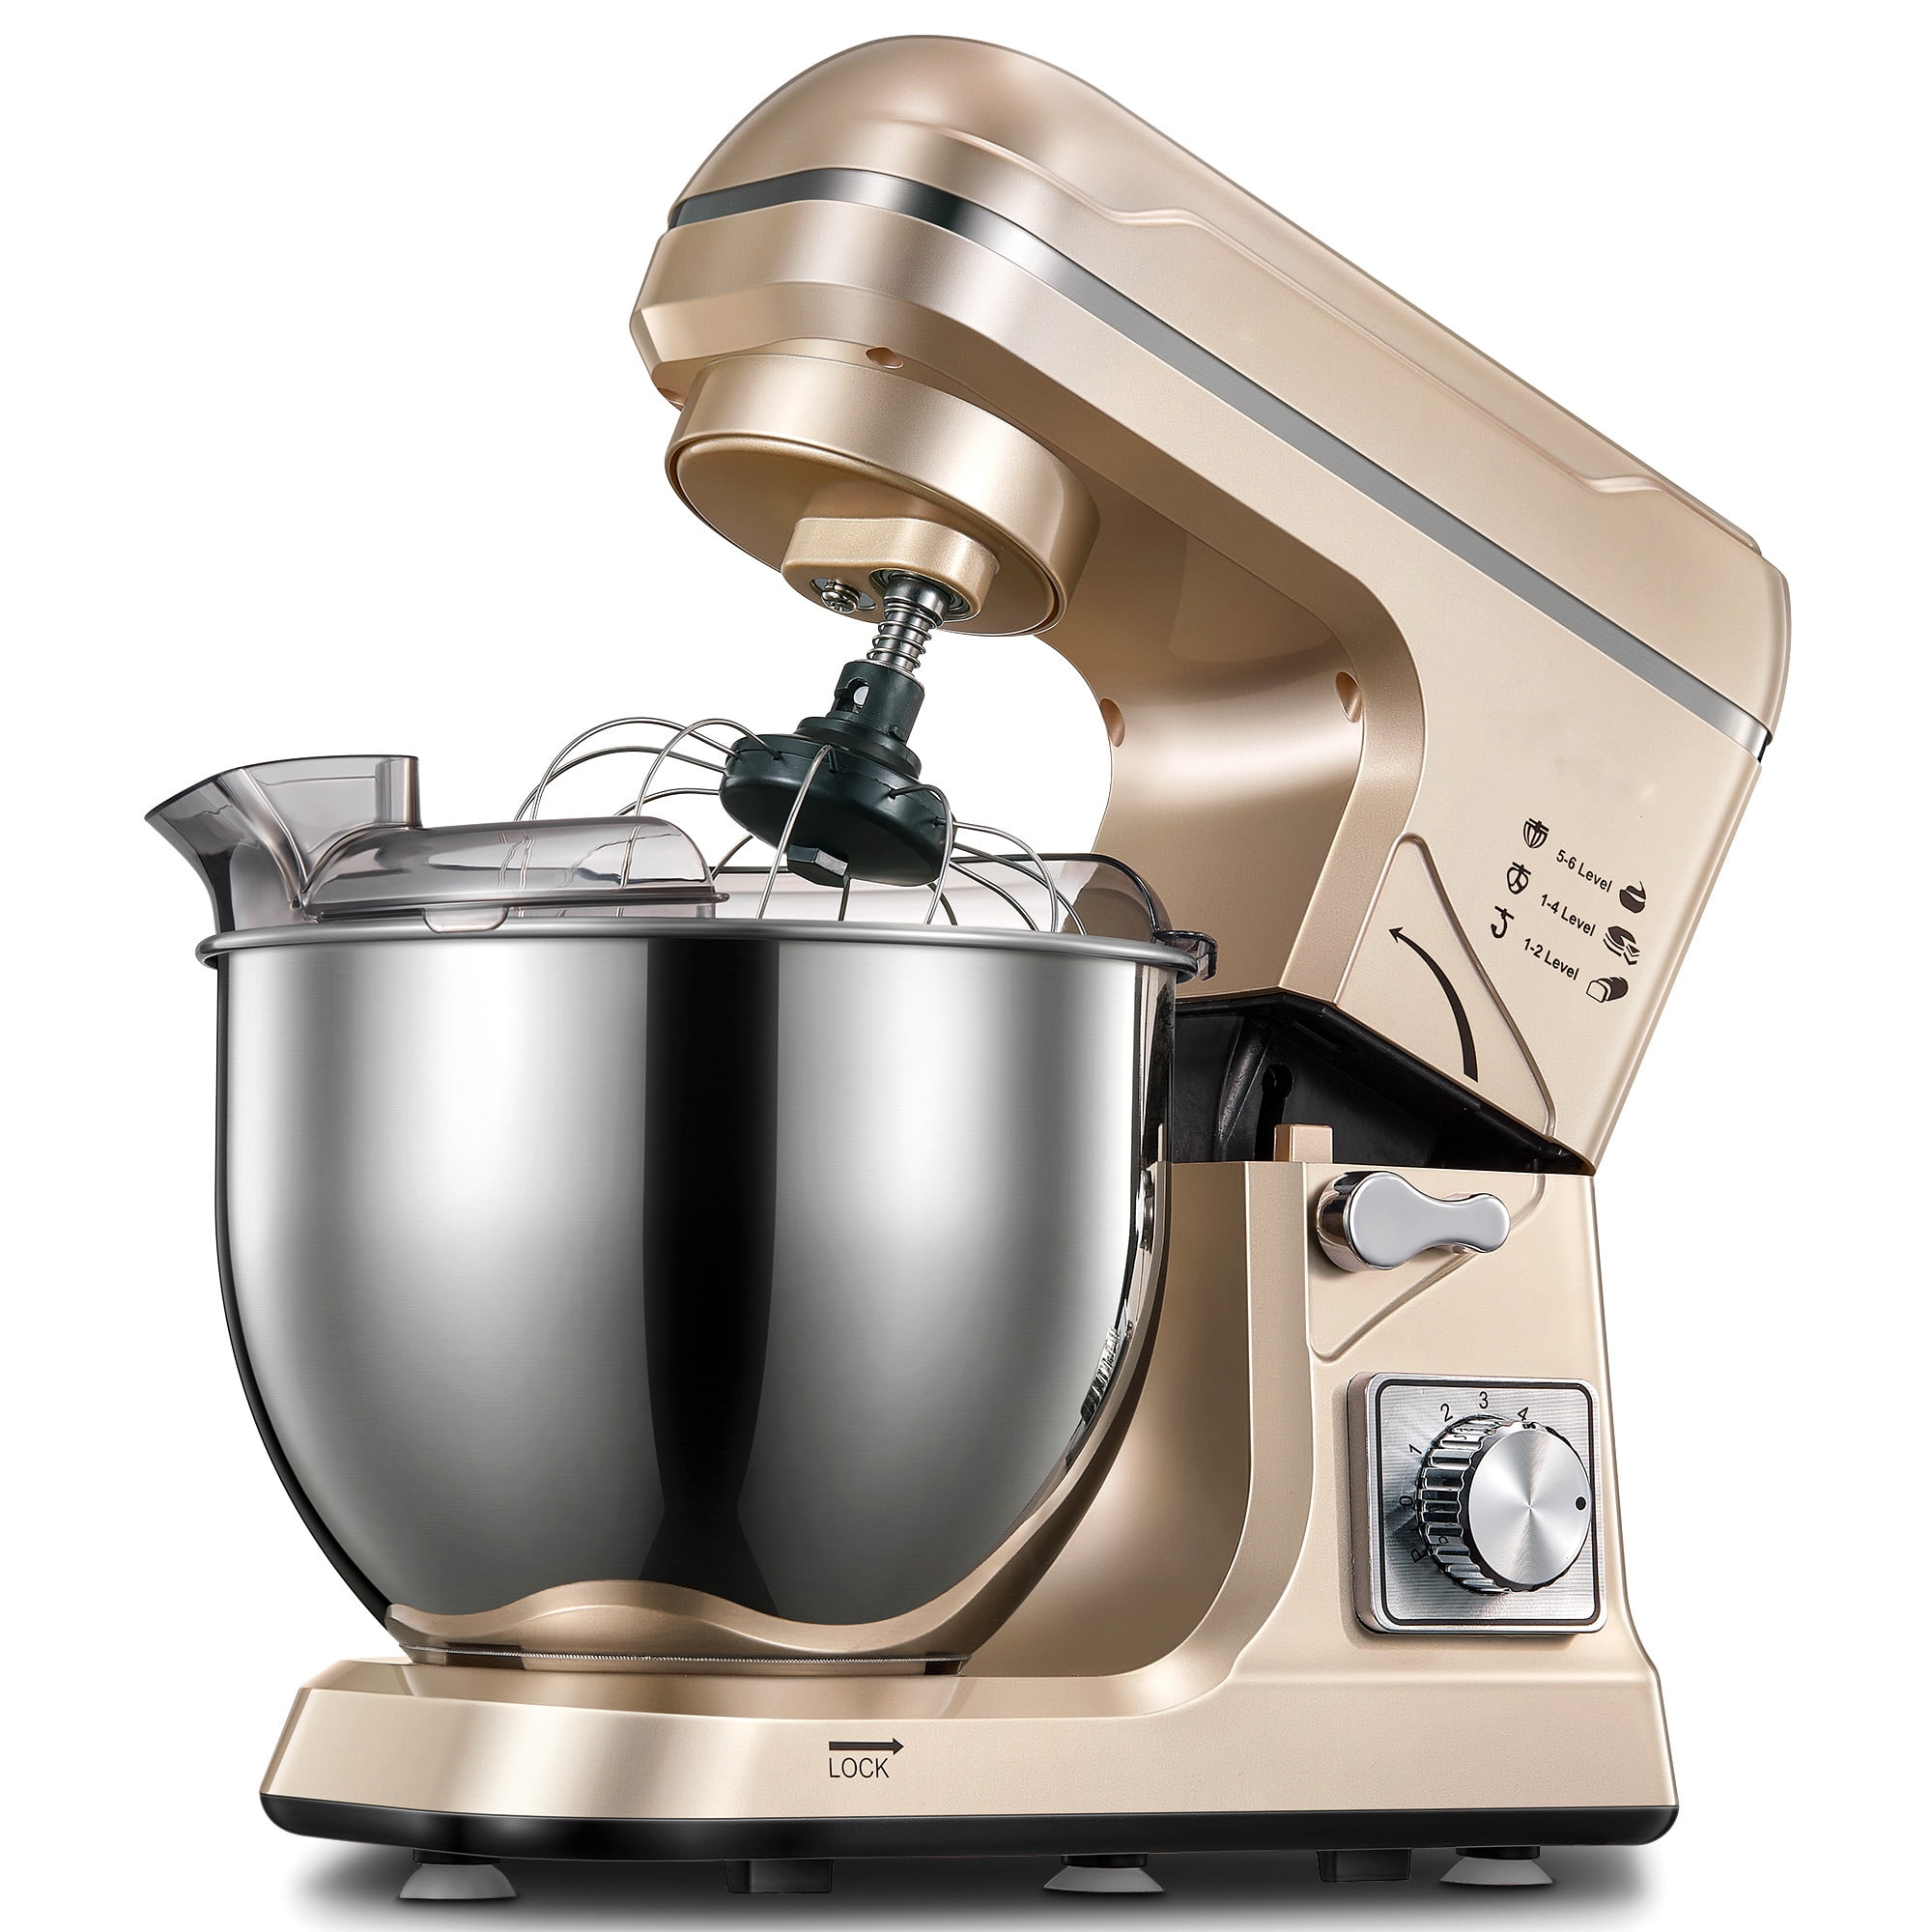 Beautiful 5.3Qt Capacity Lightweight & Powerful Tilt-Head Stand Mixer, White Icing by Drew Barrymore